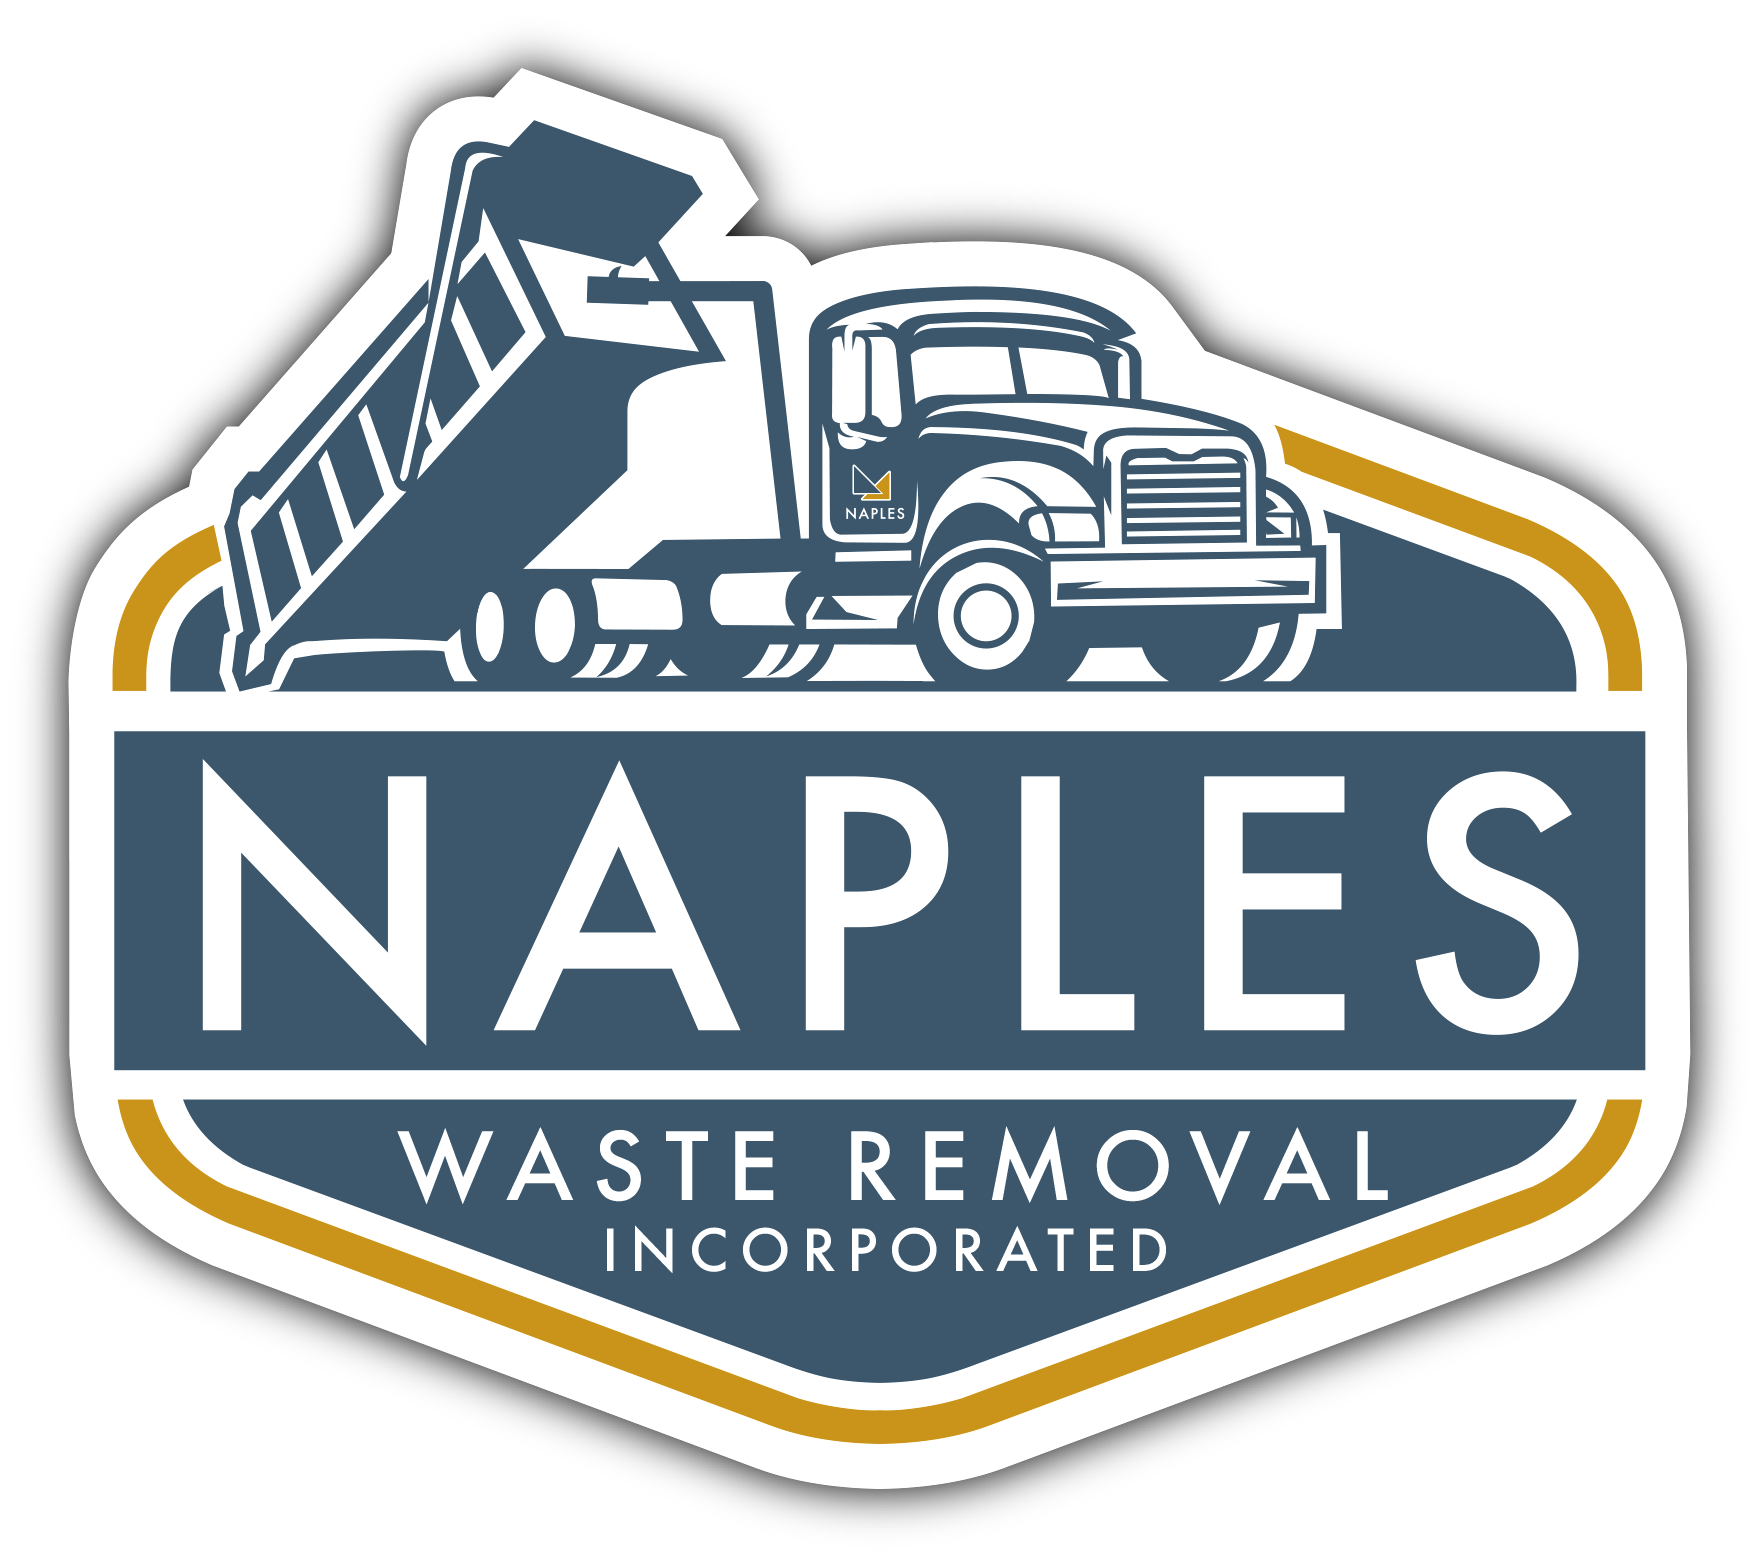 Naples Waste Removal